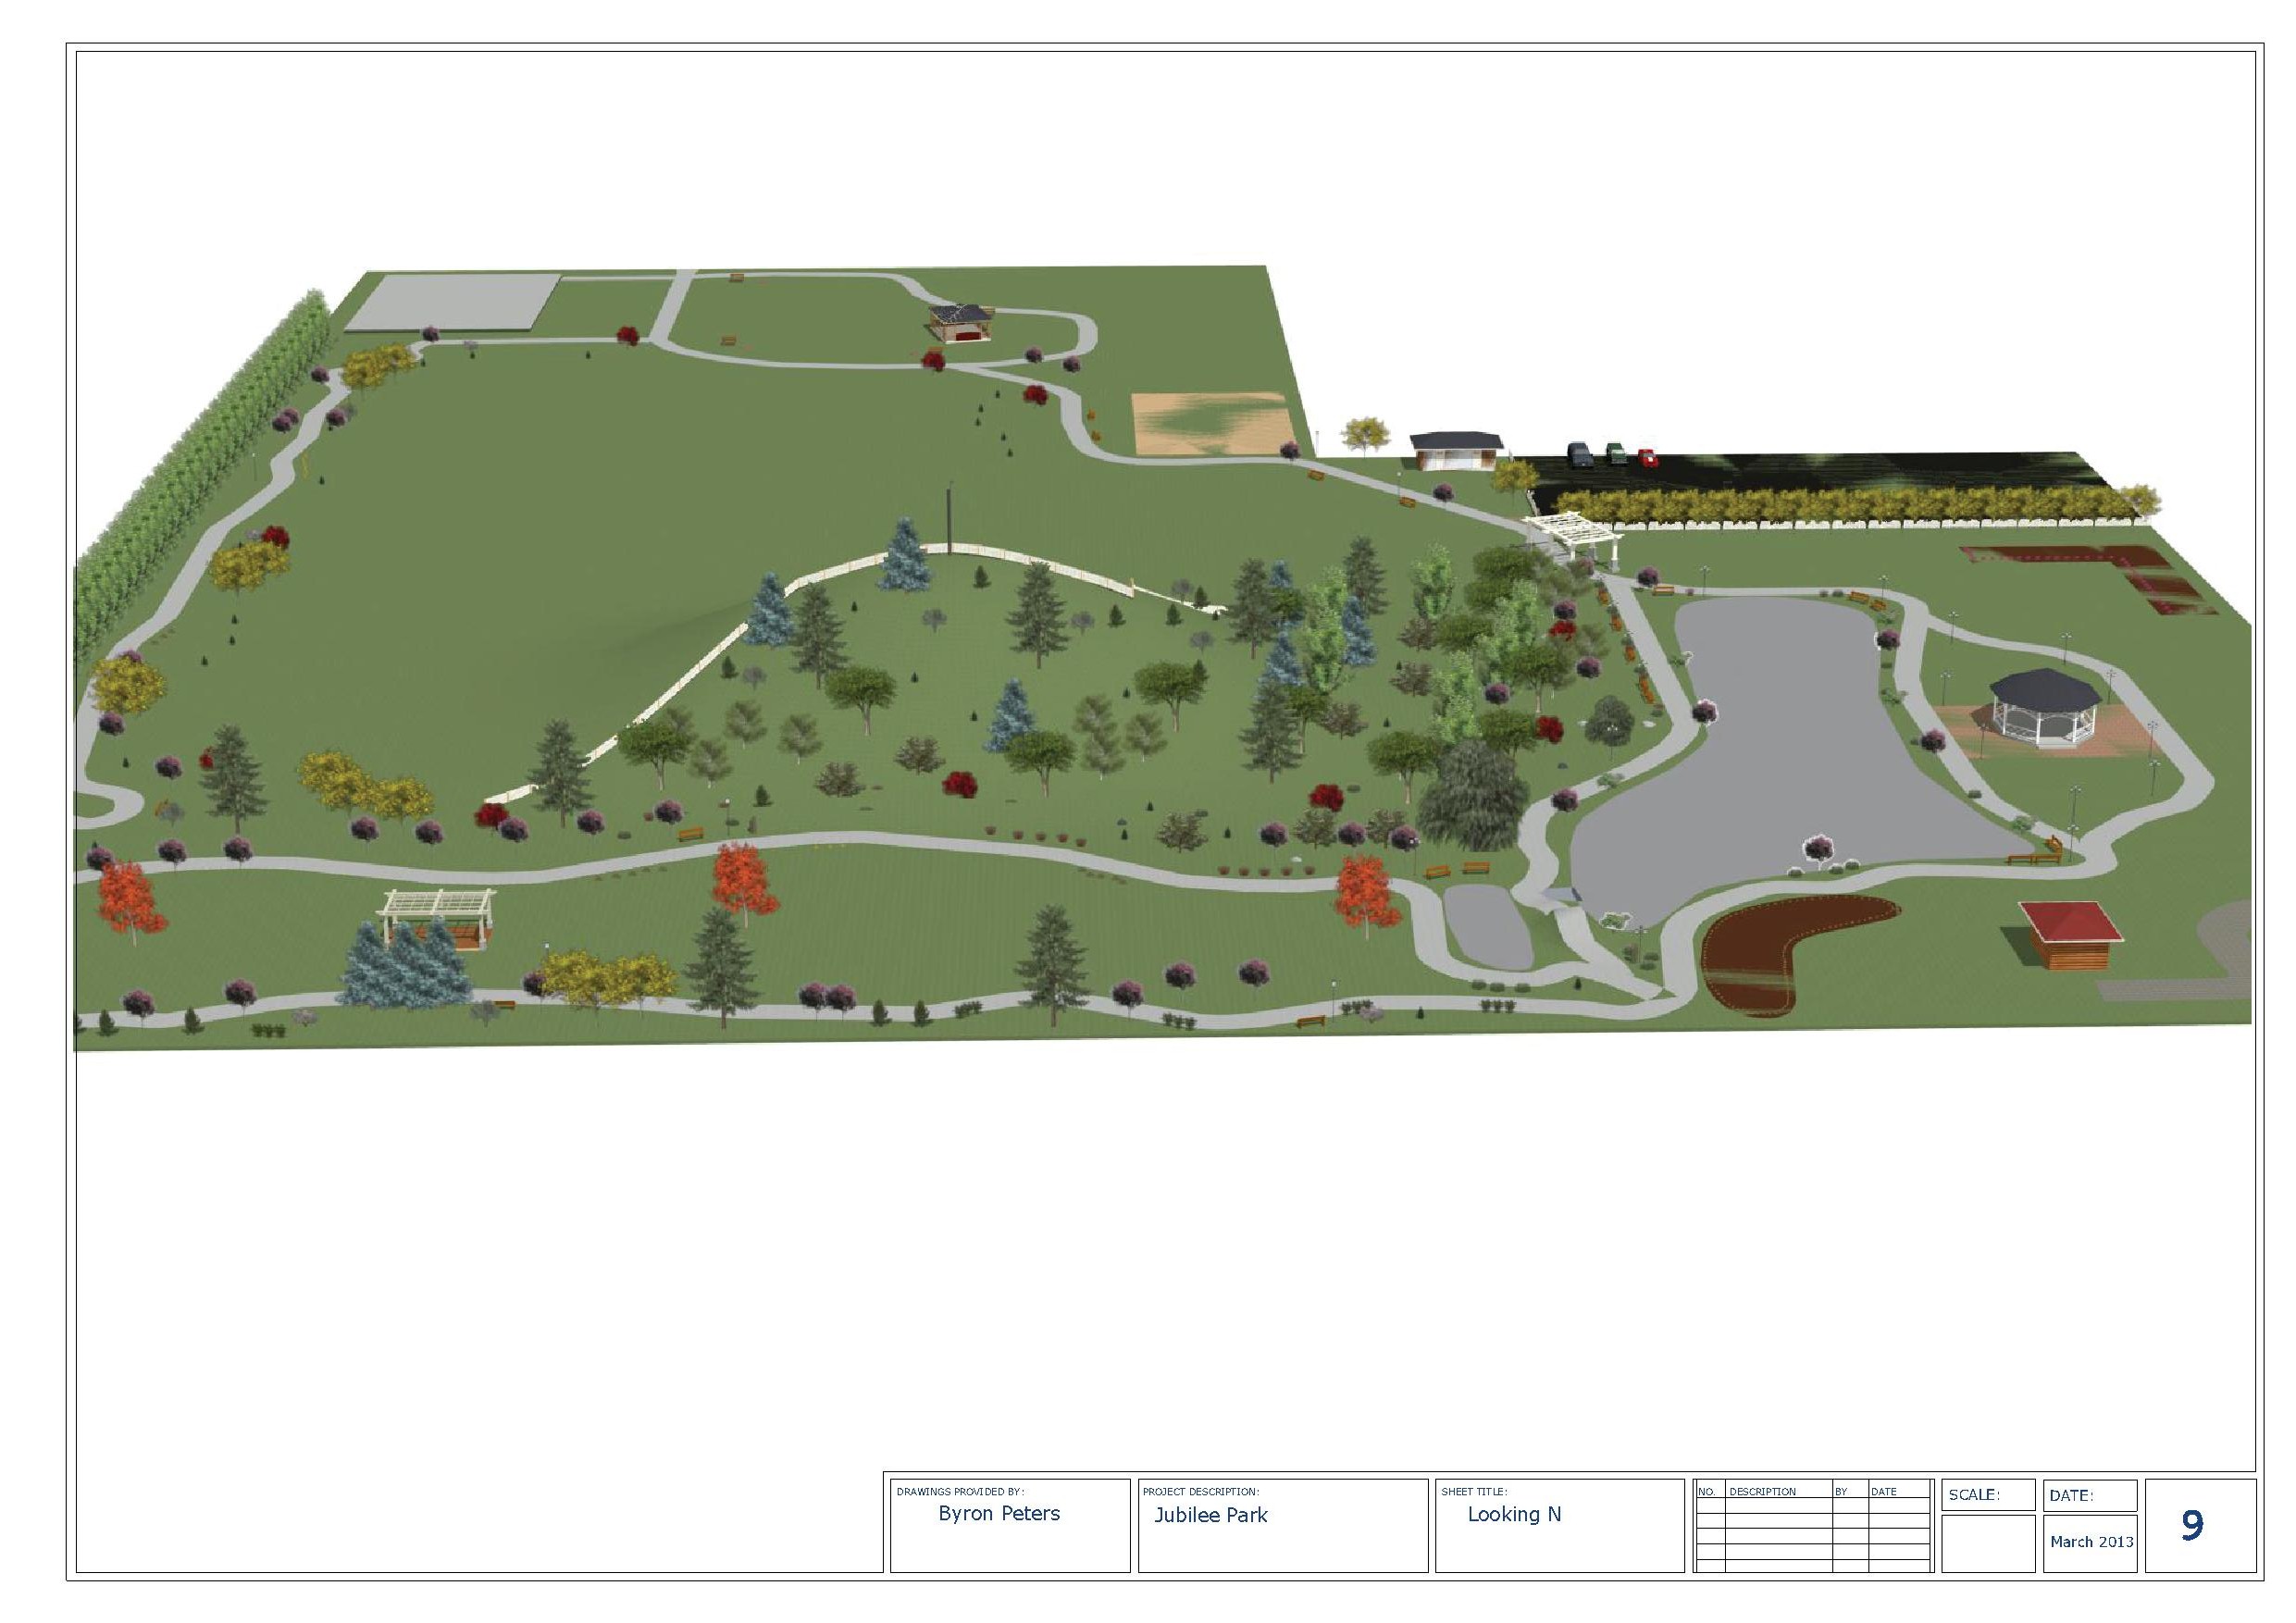 Jubilee Park Proposed Layout 9